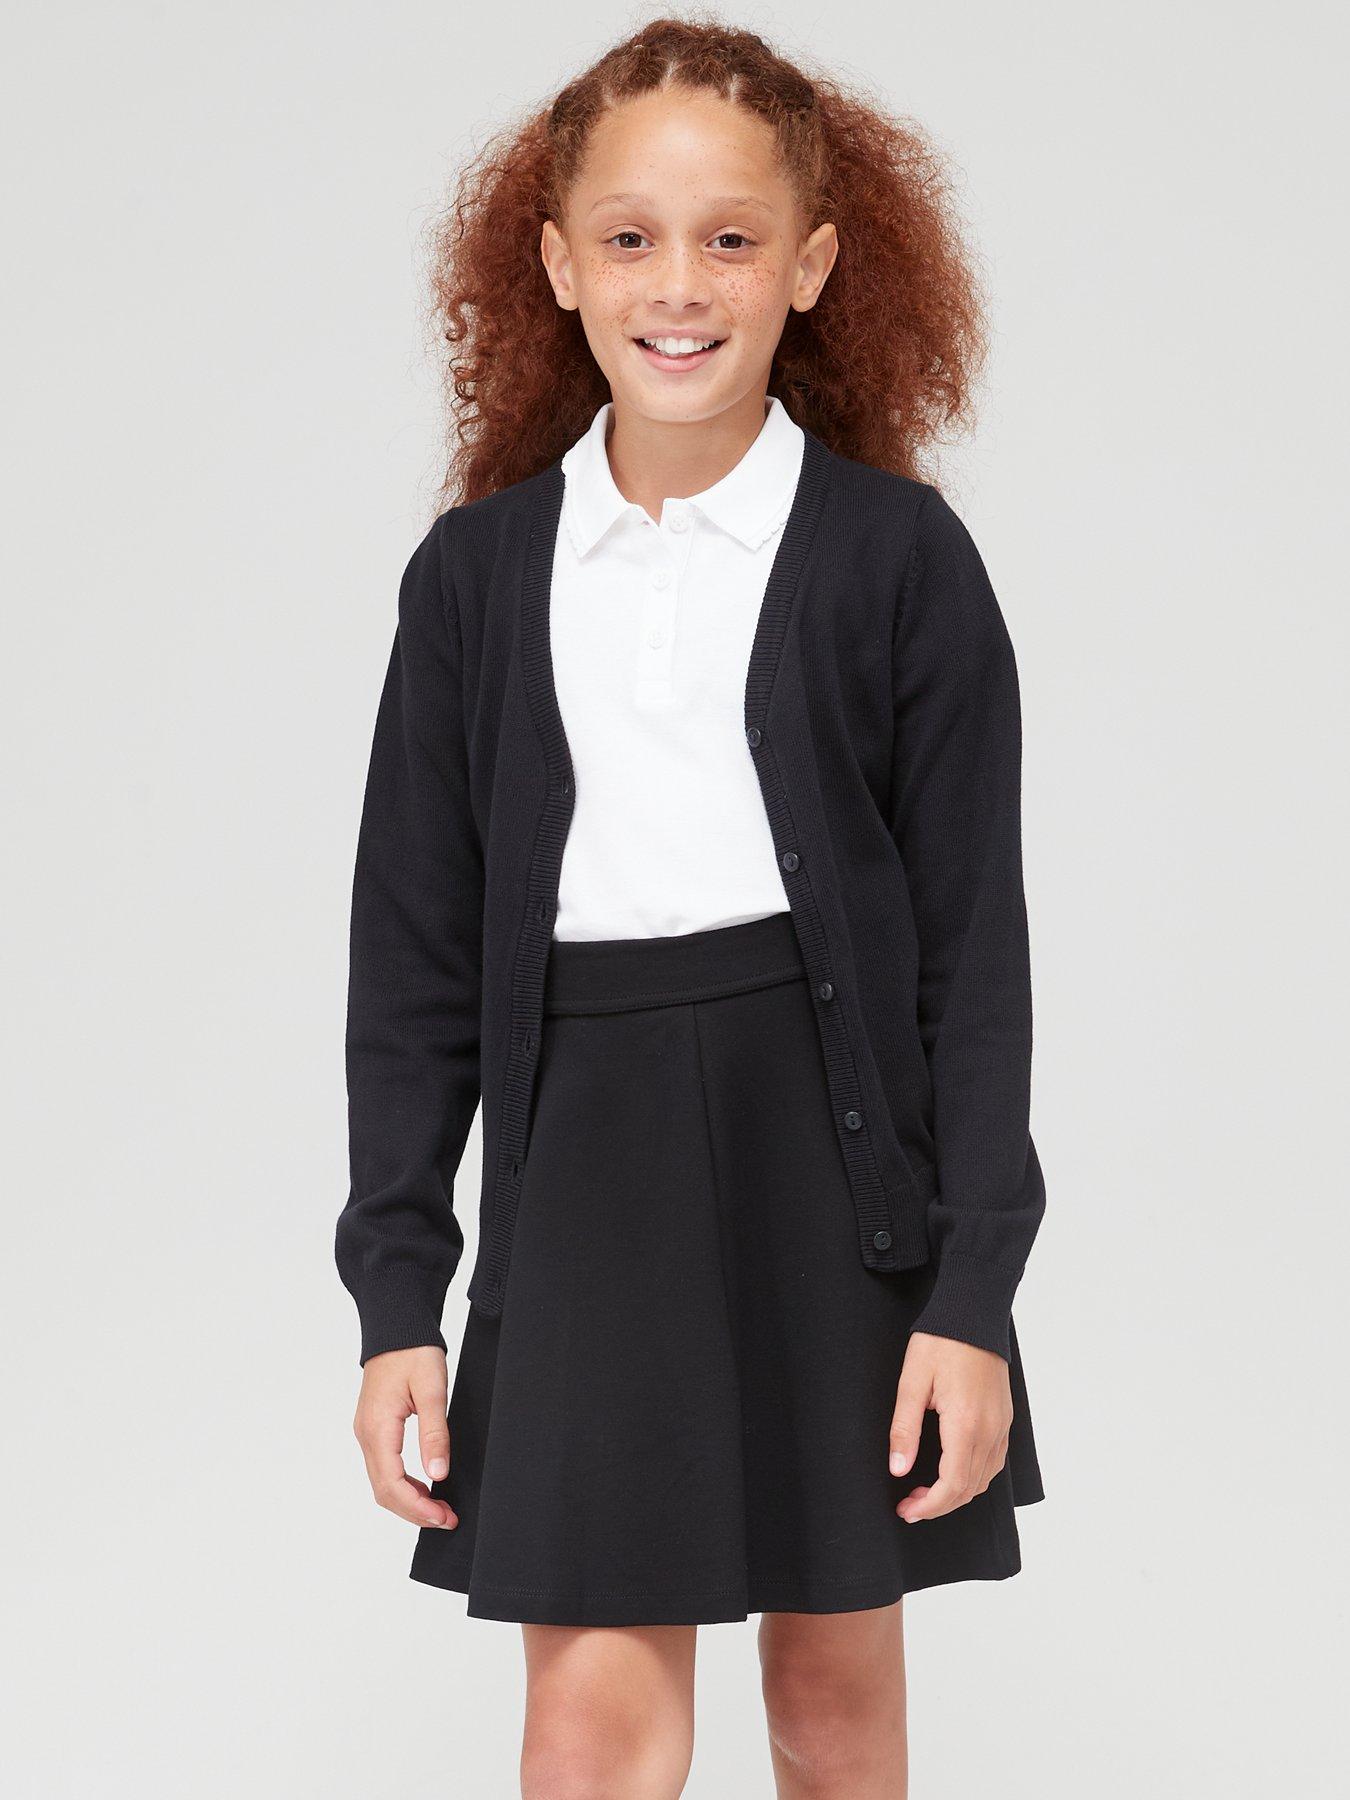 V by Very Girls 2 Pack Woven School Trouser Plus Size - Black